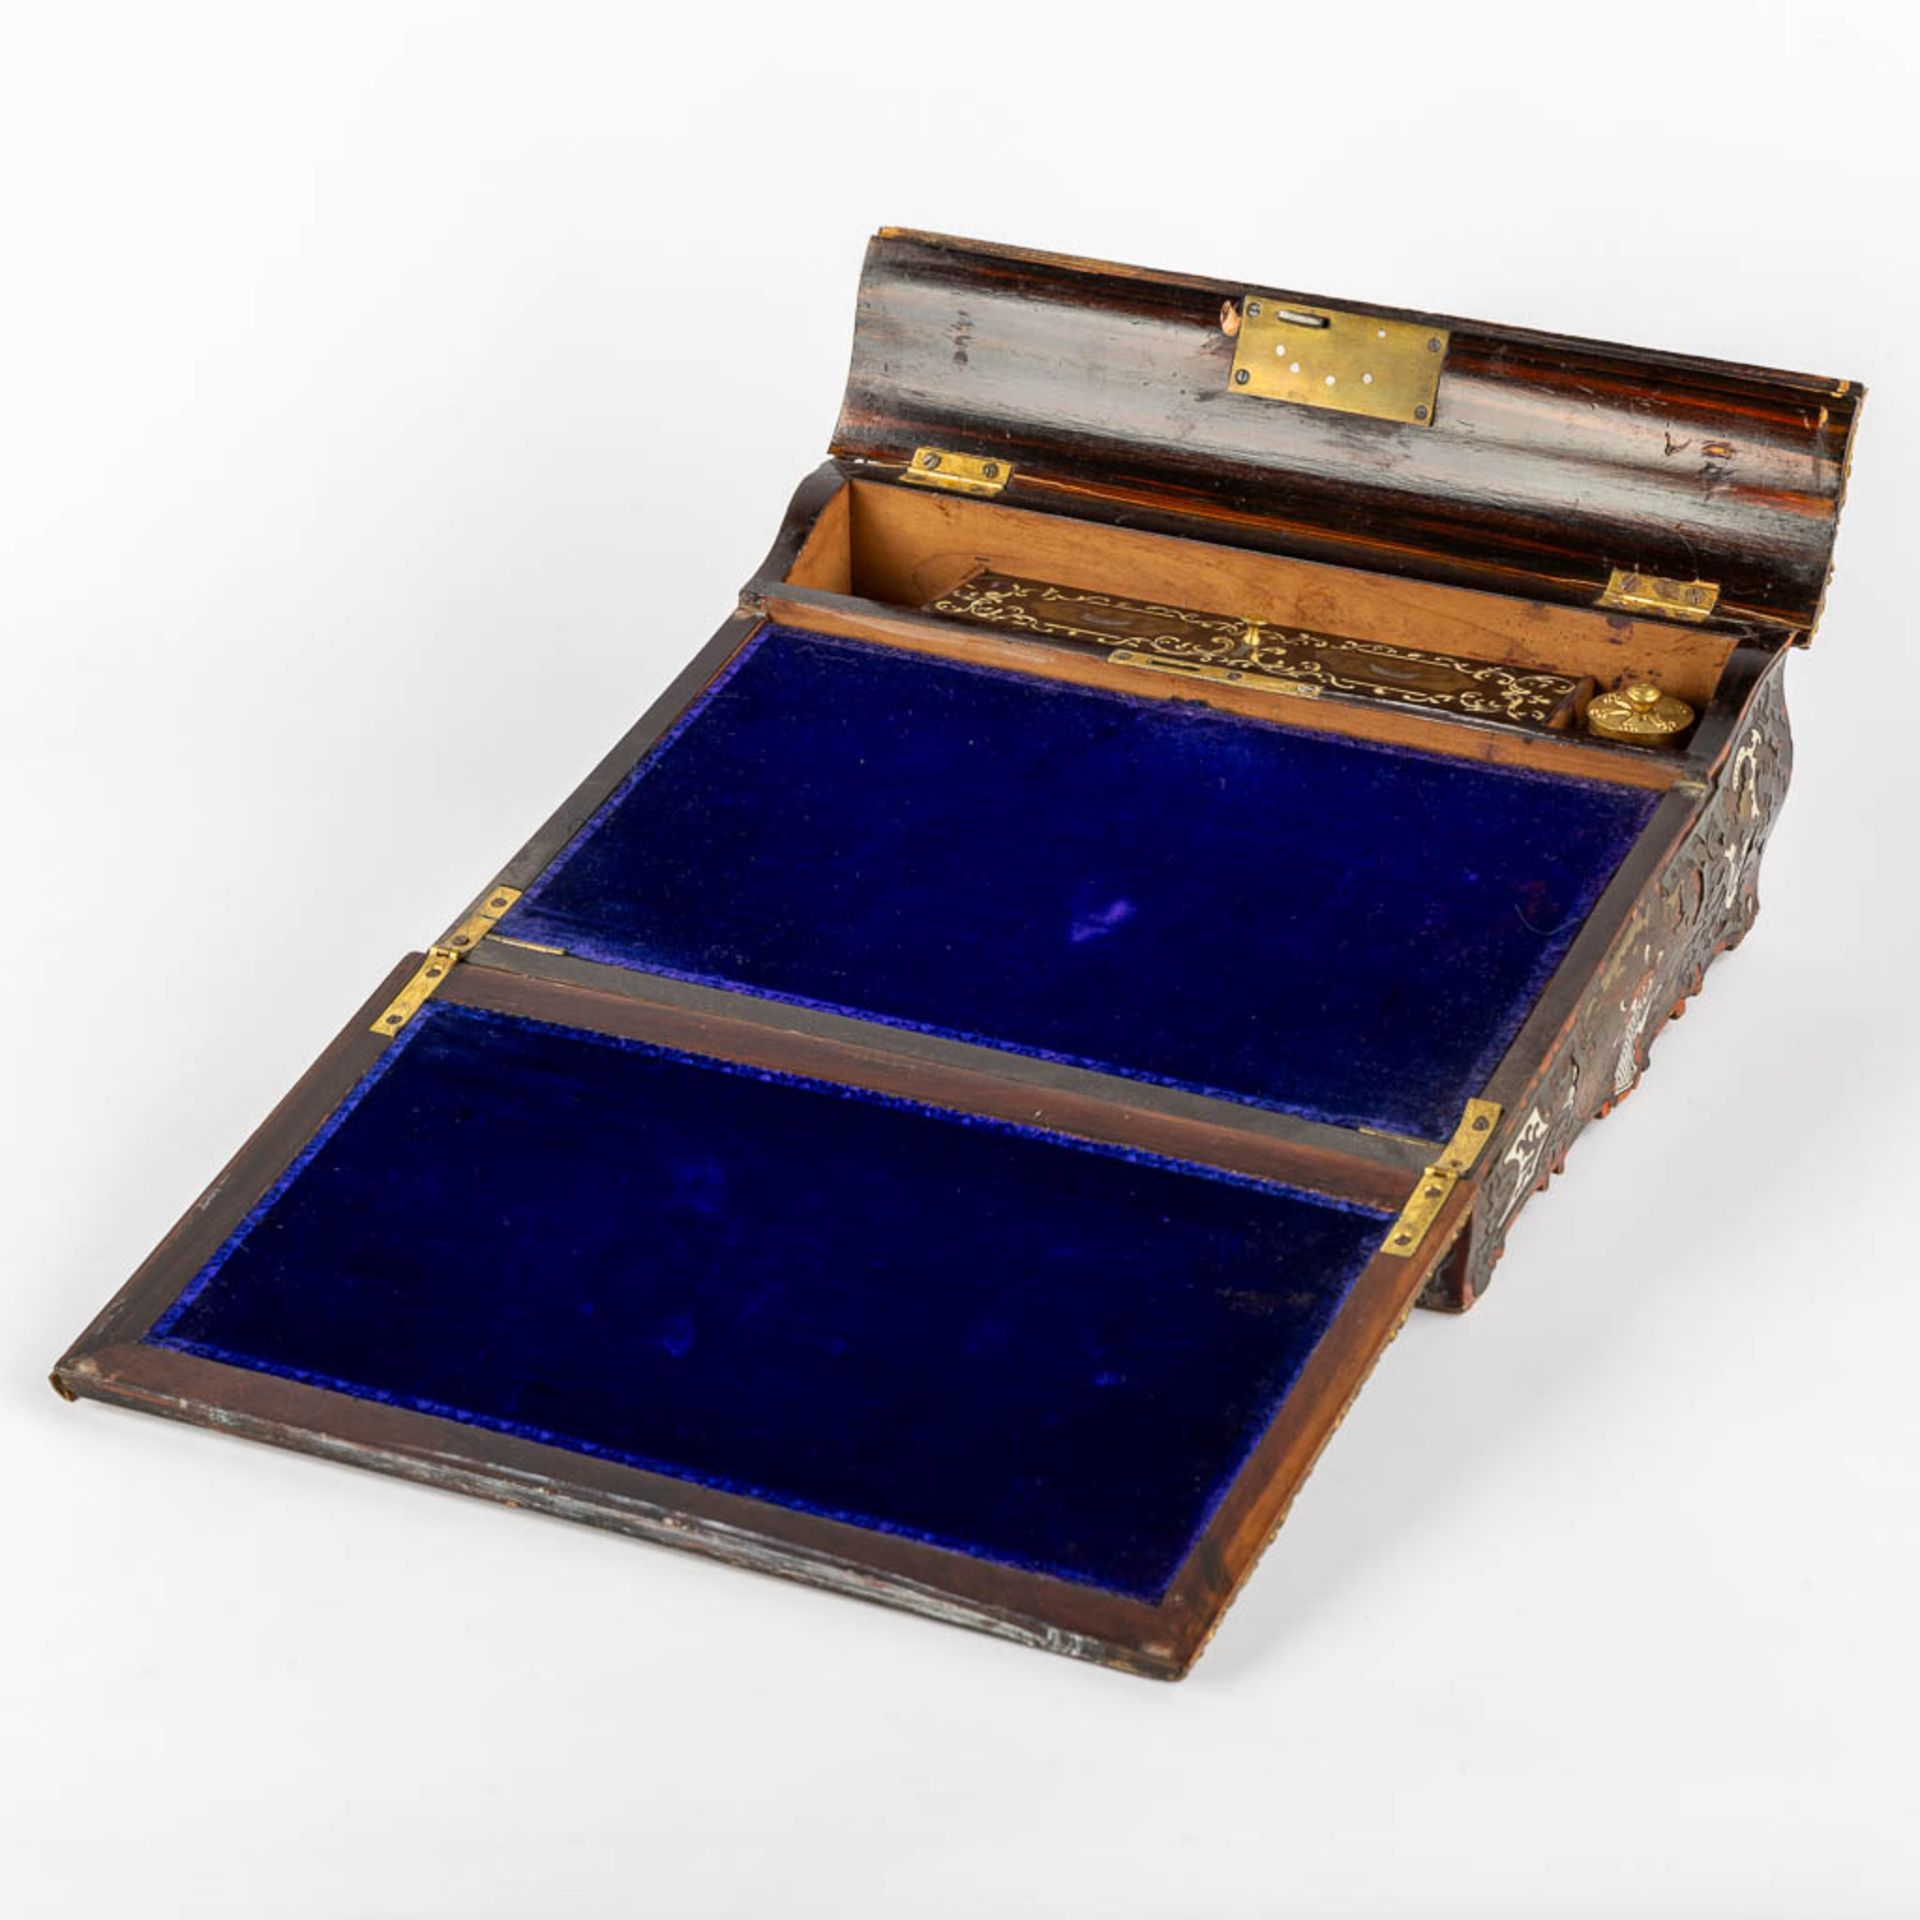 An antique writing desk, Boulle and marquetry inlay. Napoleon 3. (L:24 x W:31 x H:10,5 cm) - Image 3 of 12